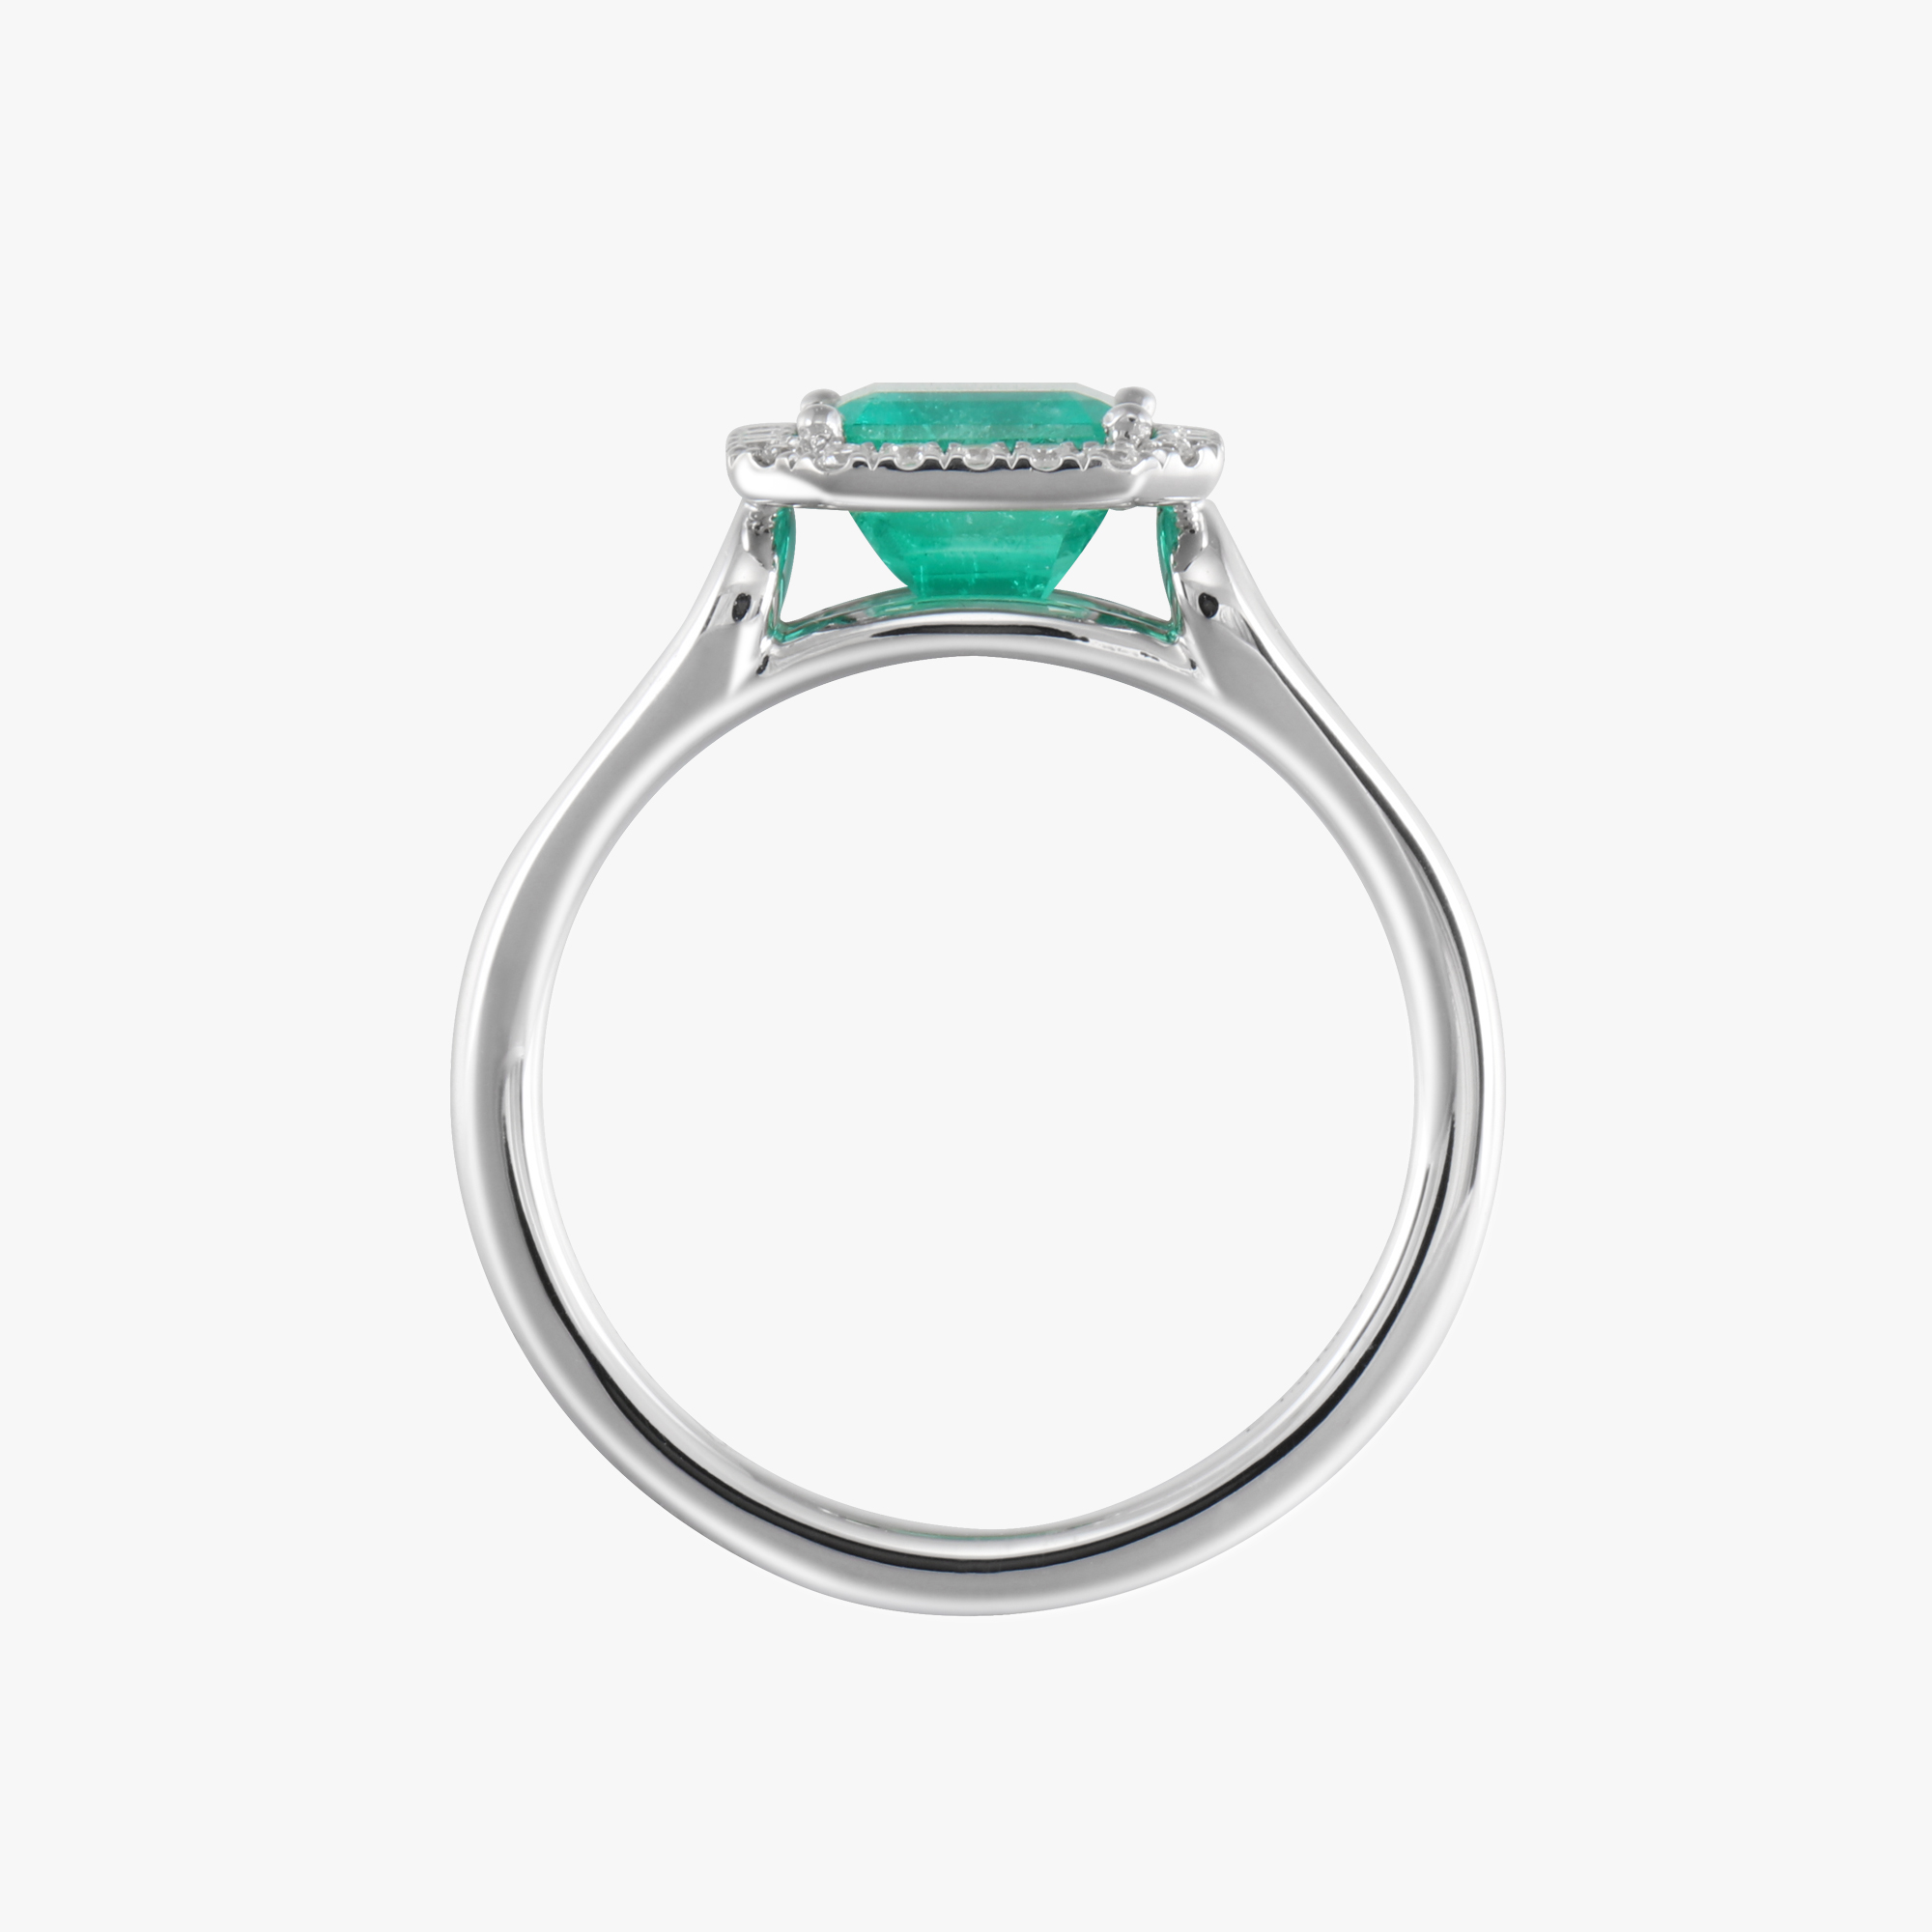 ACCA 18KW Ring with Emerald and Diamond